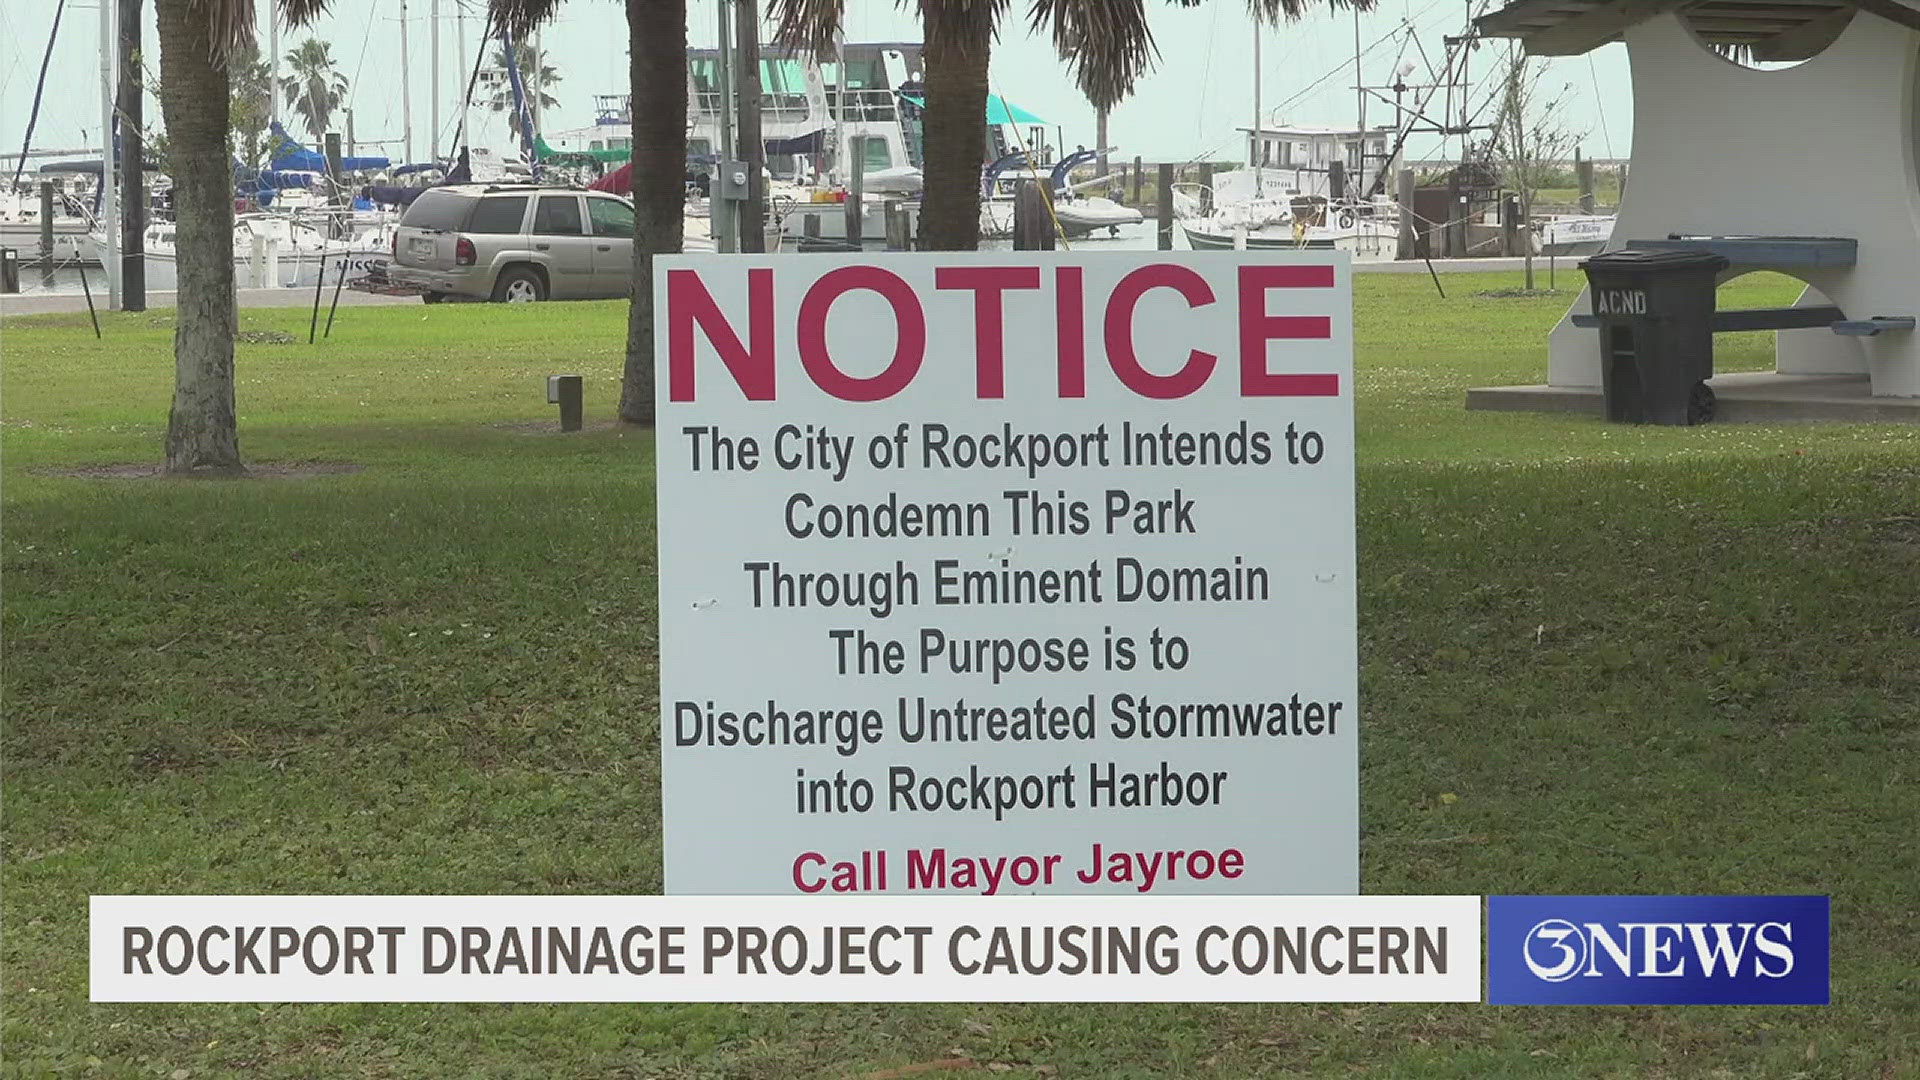 Residents and business owners are concerned that the new project will drive polluted storm water directly into the harbor.